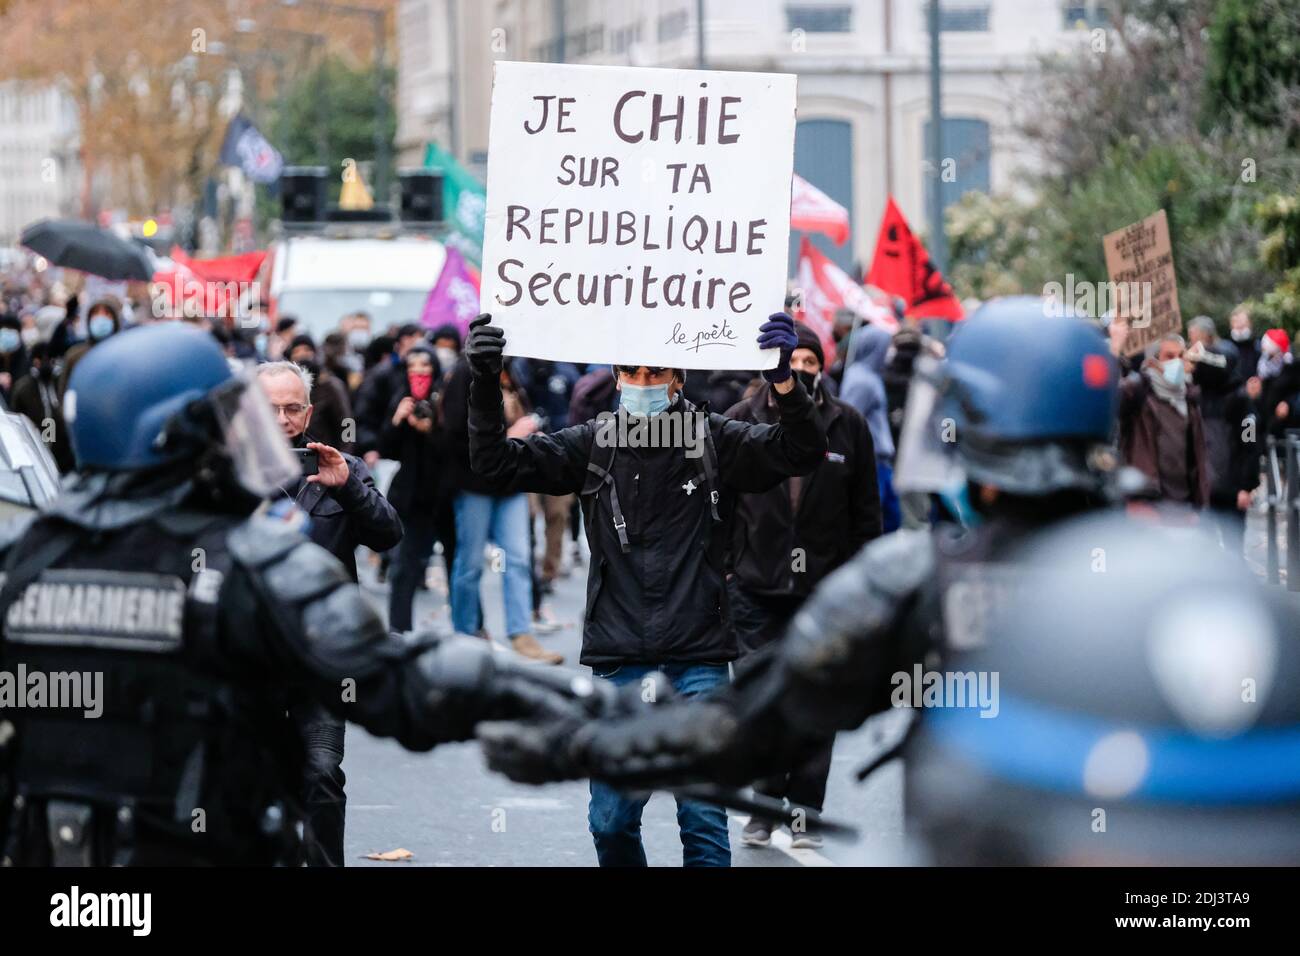 Lyon (France), 12 December 2020. 2000 demonstrators according to the Rhône prefecture for this new pride march in Lyon. Law enforcement in action. Stock Photo